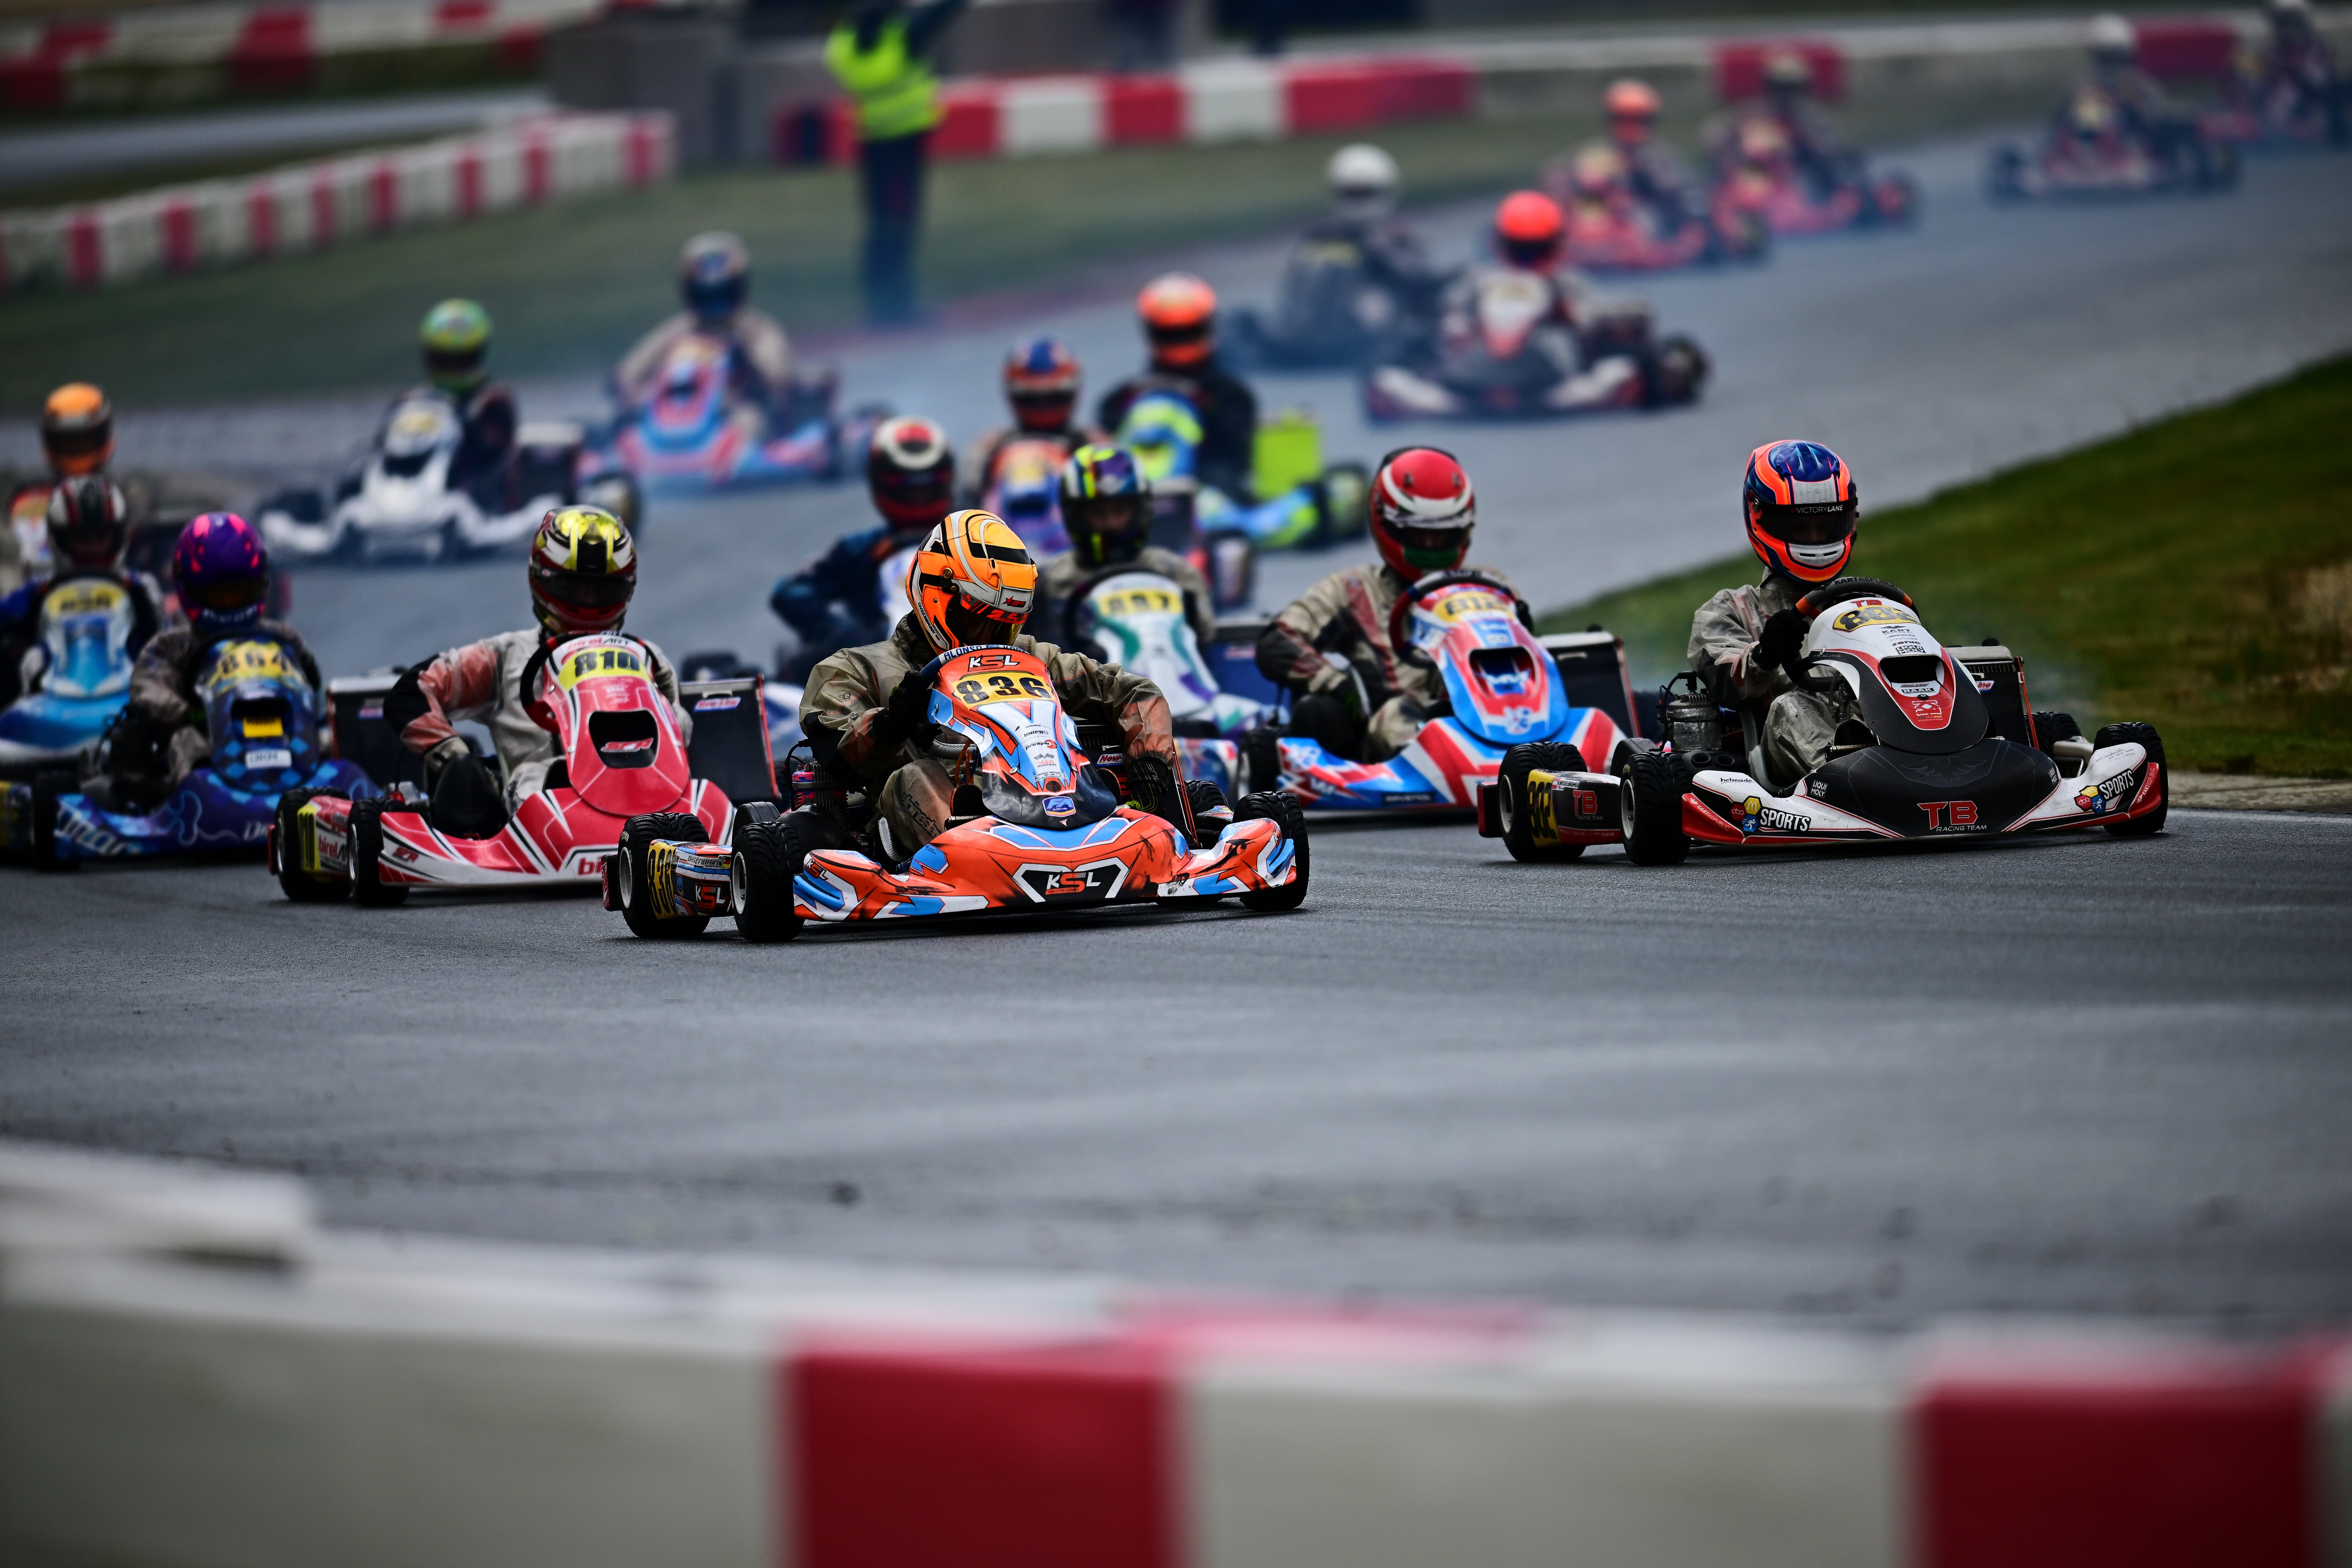 The IAME Series Germany continues